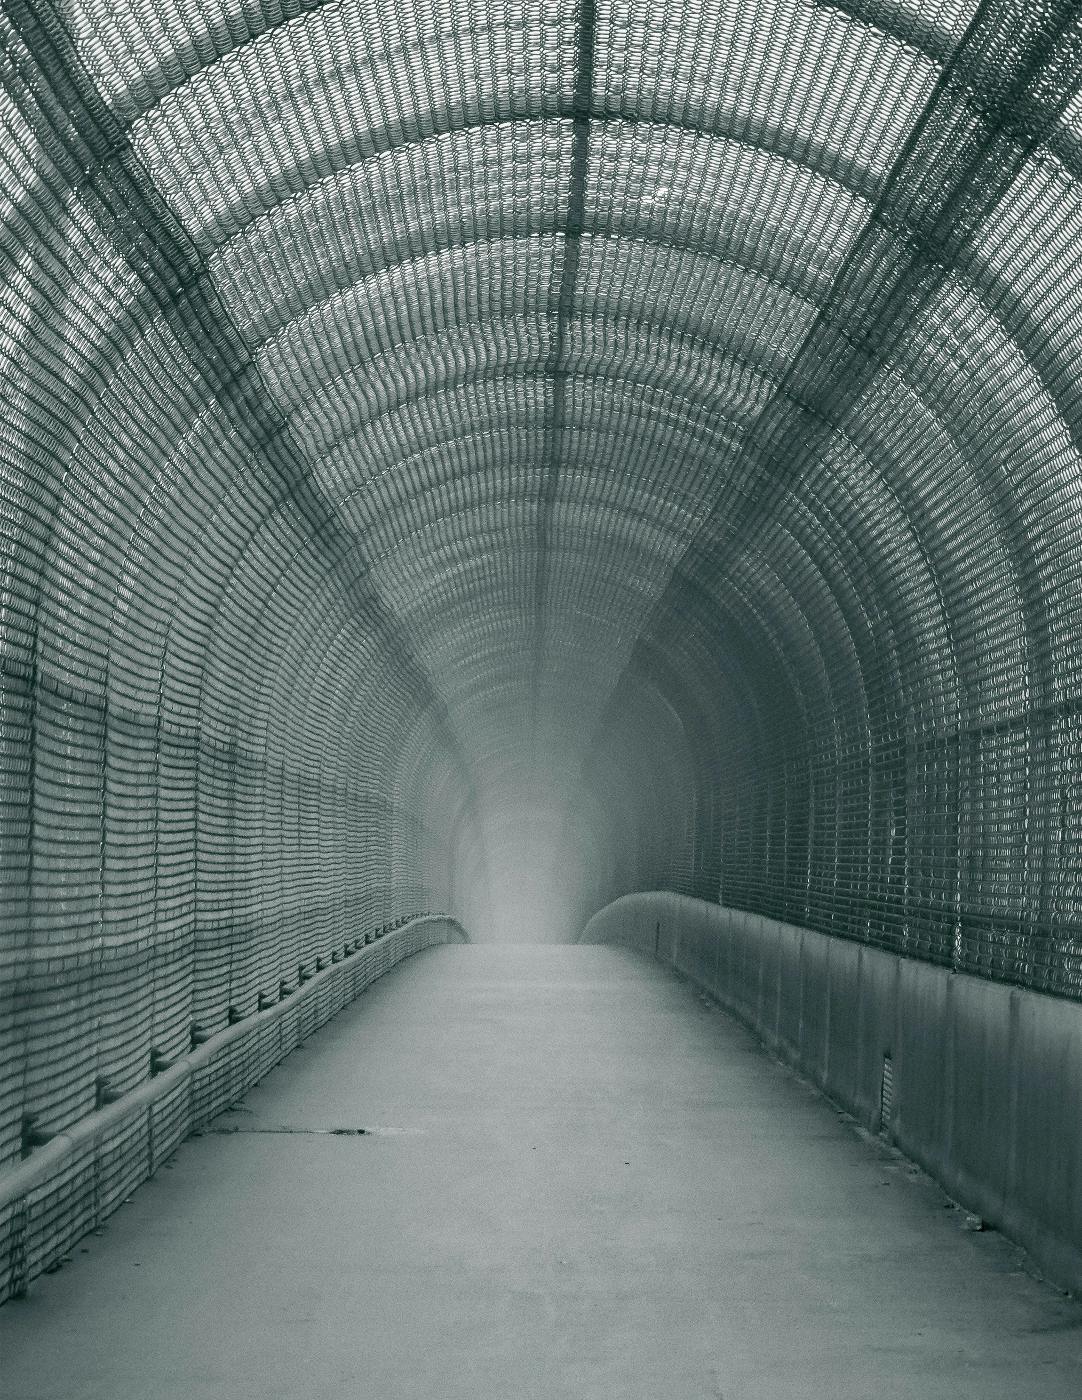 A pedestrian bridge covered by a chain link fence